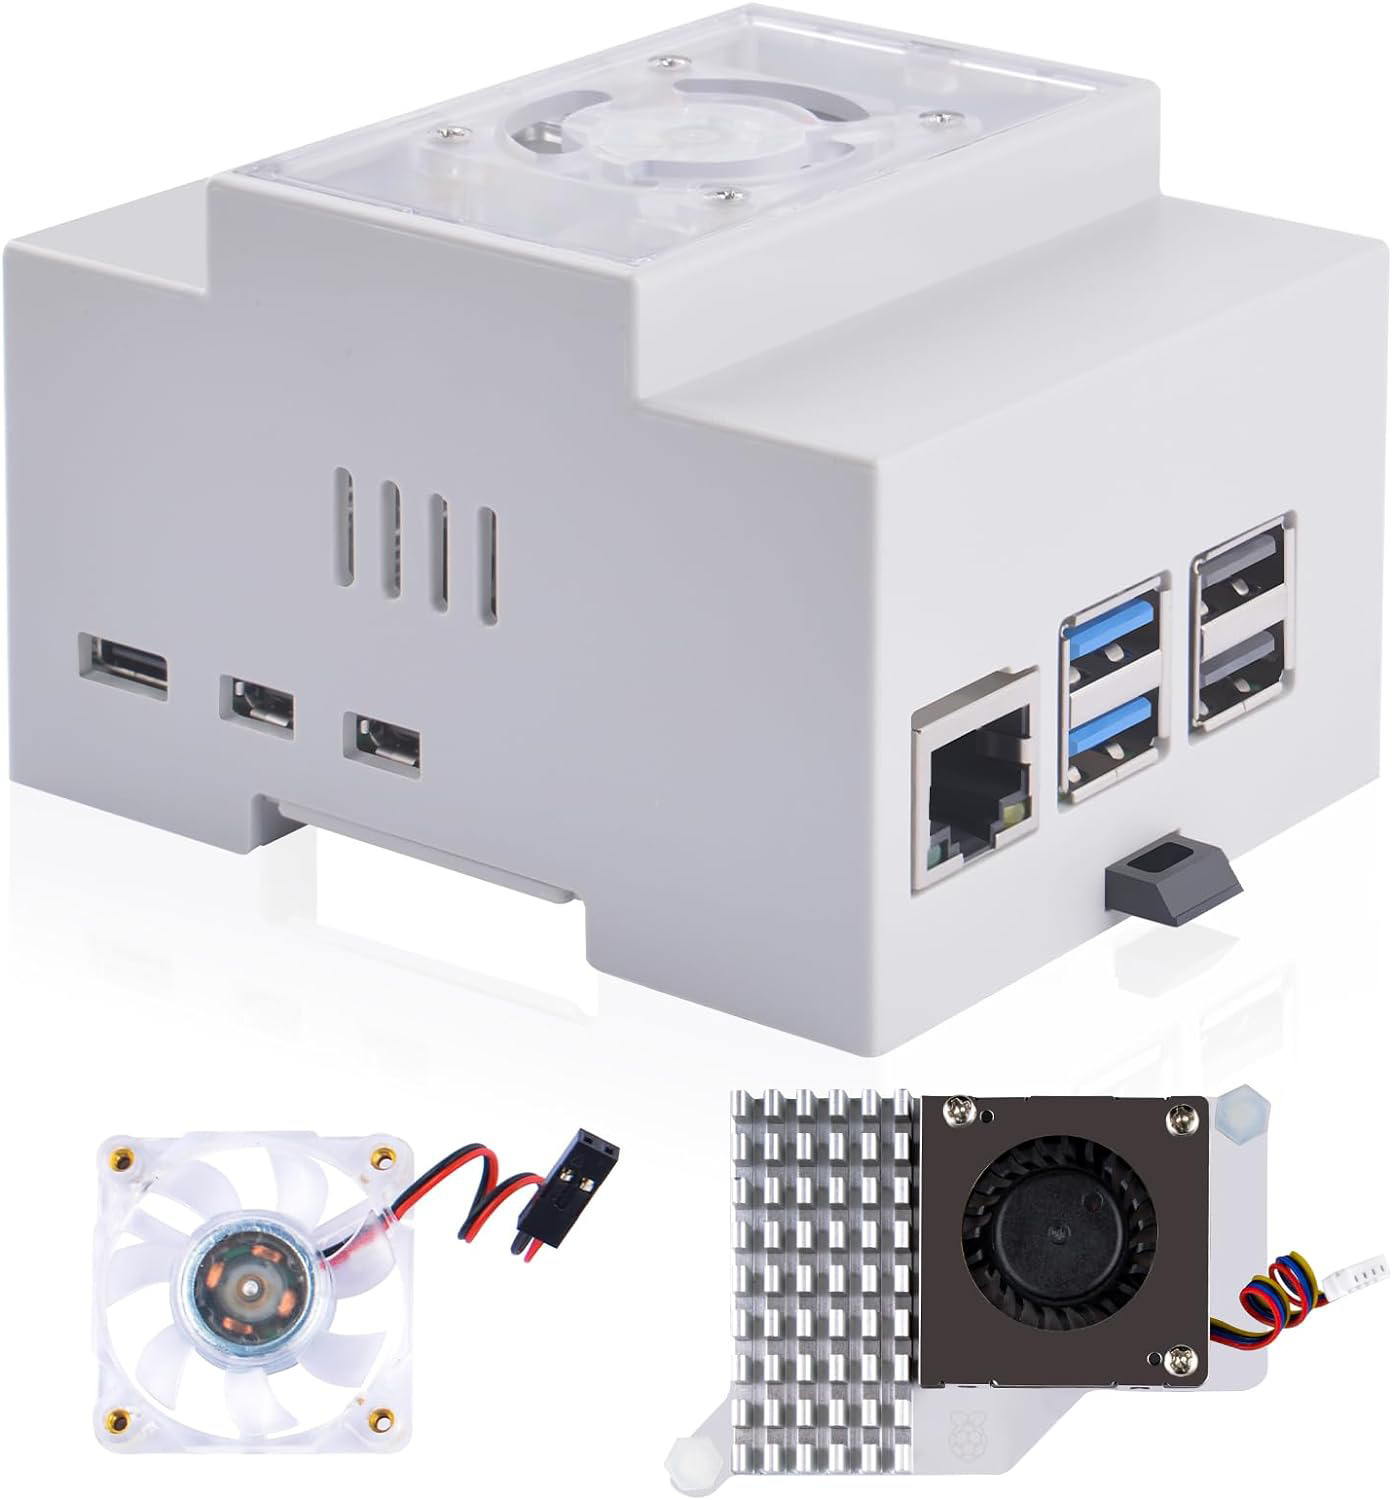 GeeekPi Case for Raspberry Pi 5, DIN Rail Case with Active Cooler for Raspberry